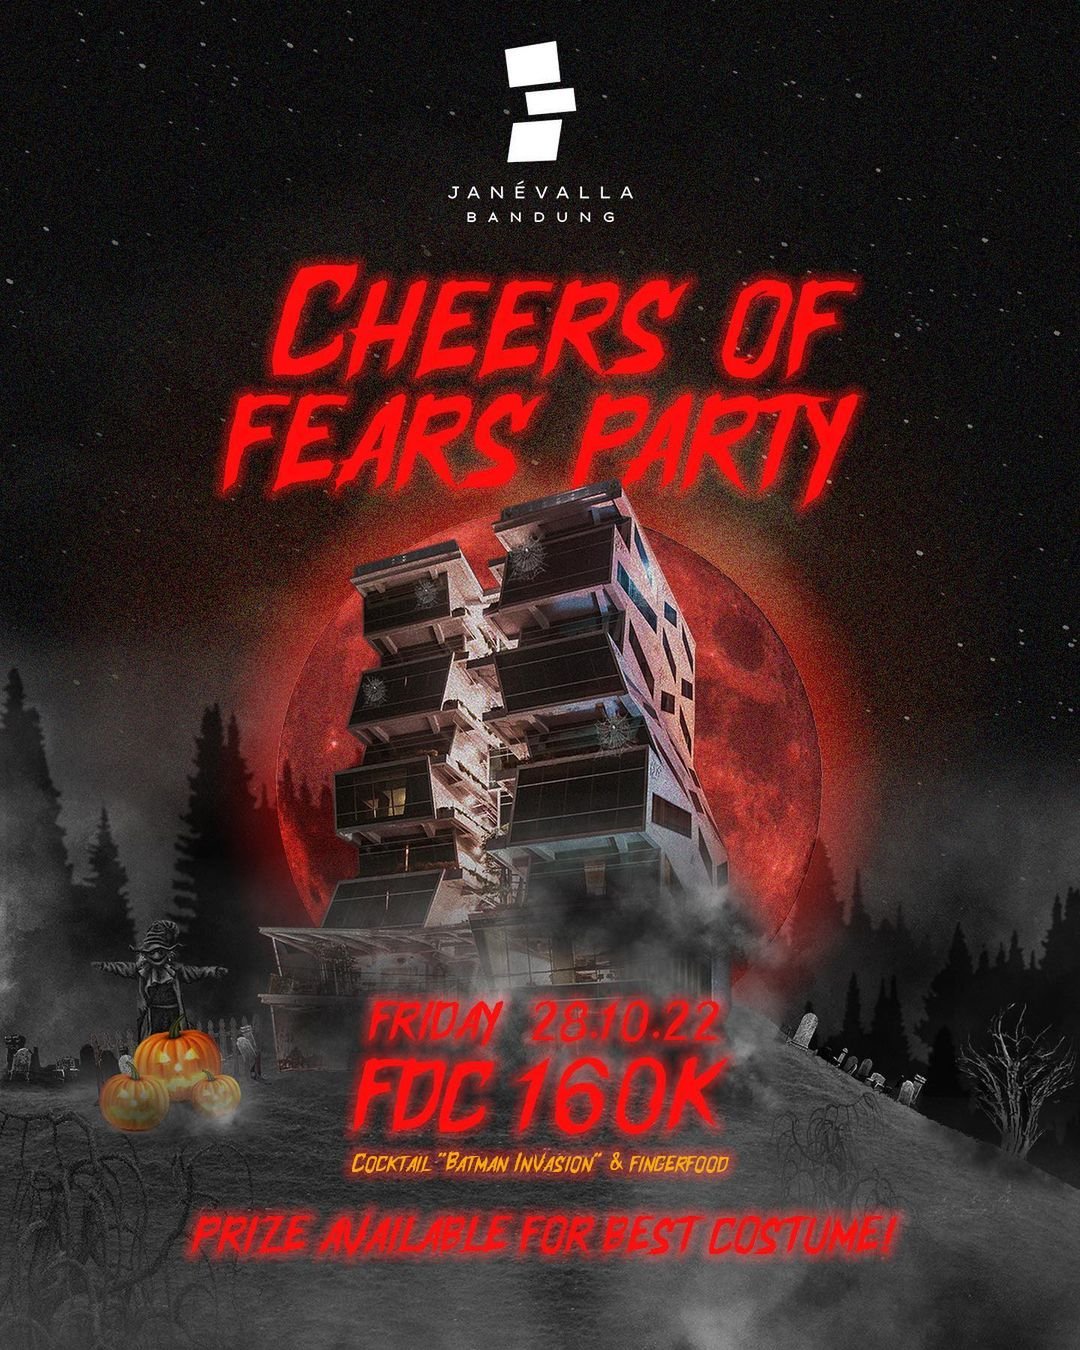 Cheers of Fears